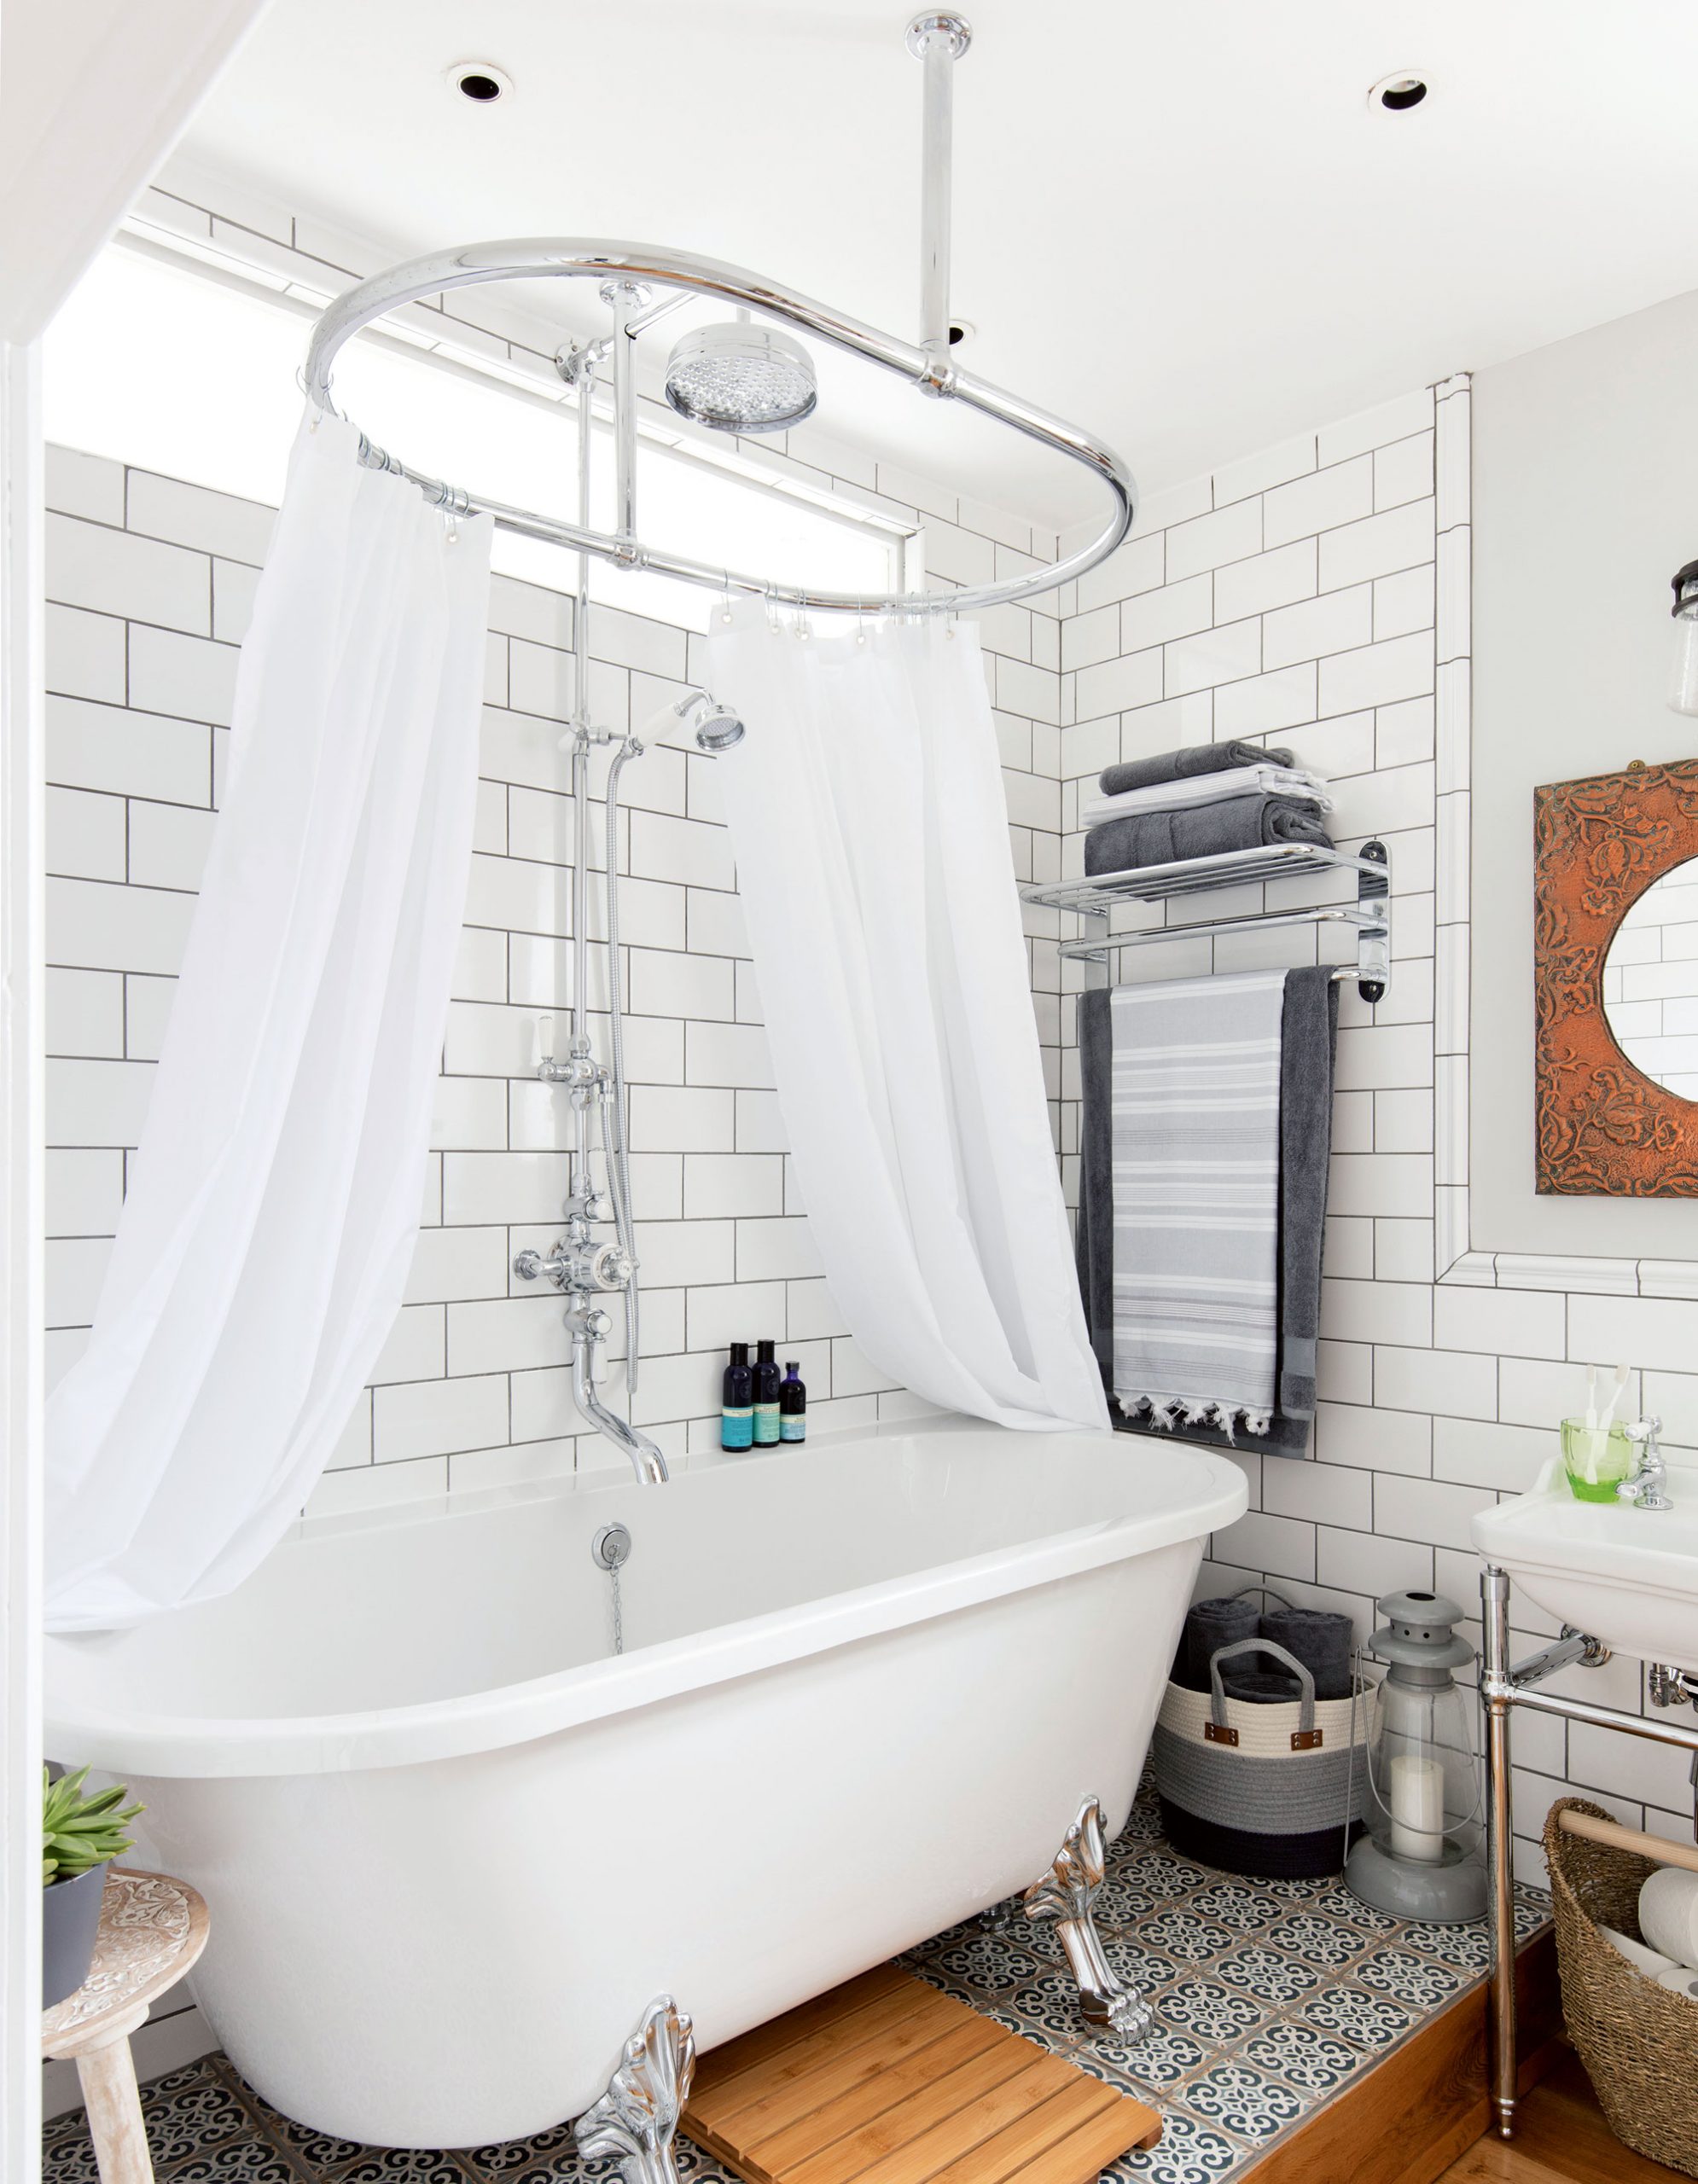 Shower Curtain Ideas cost effective ways to upgrade bathrooms ...